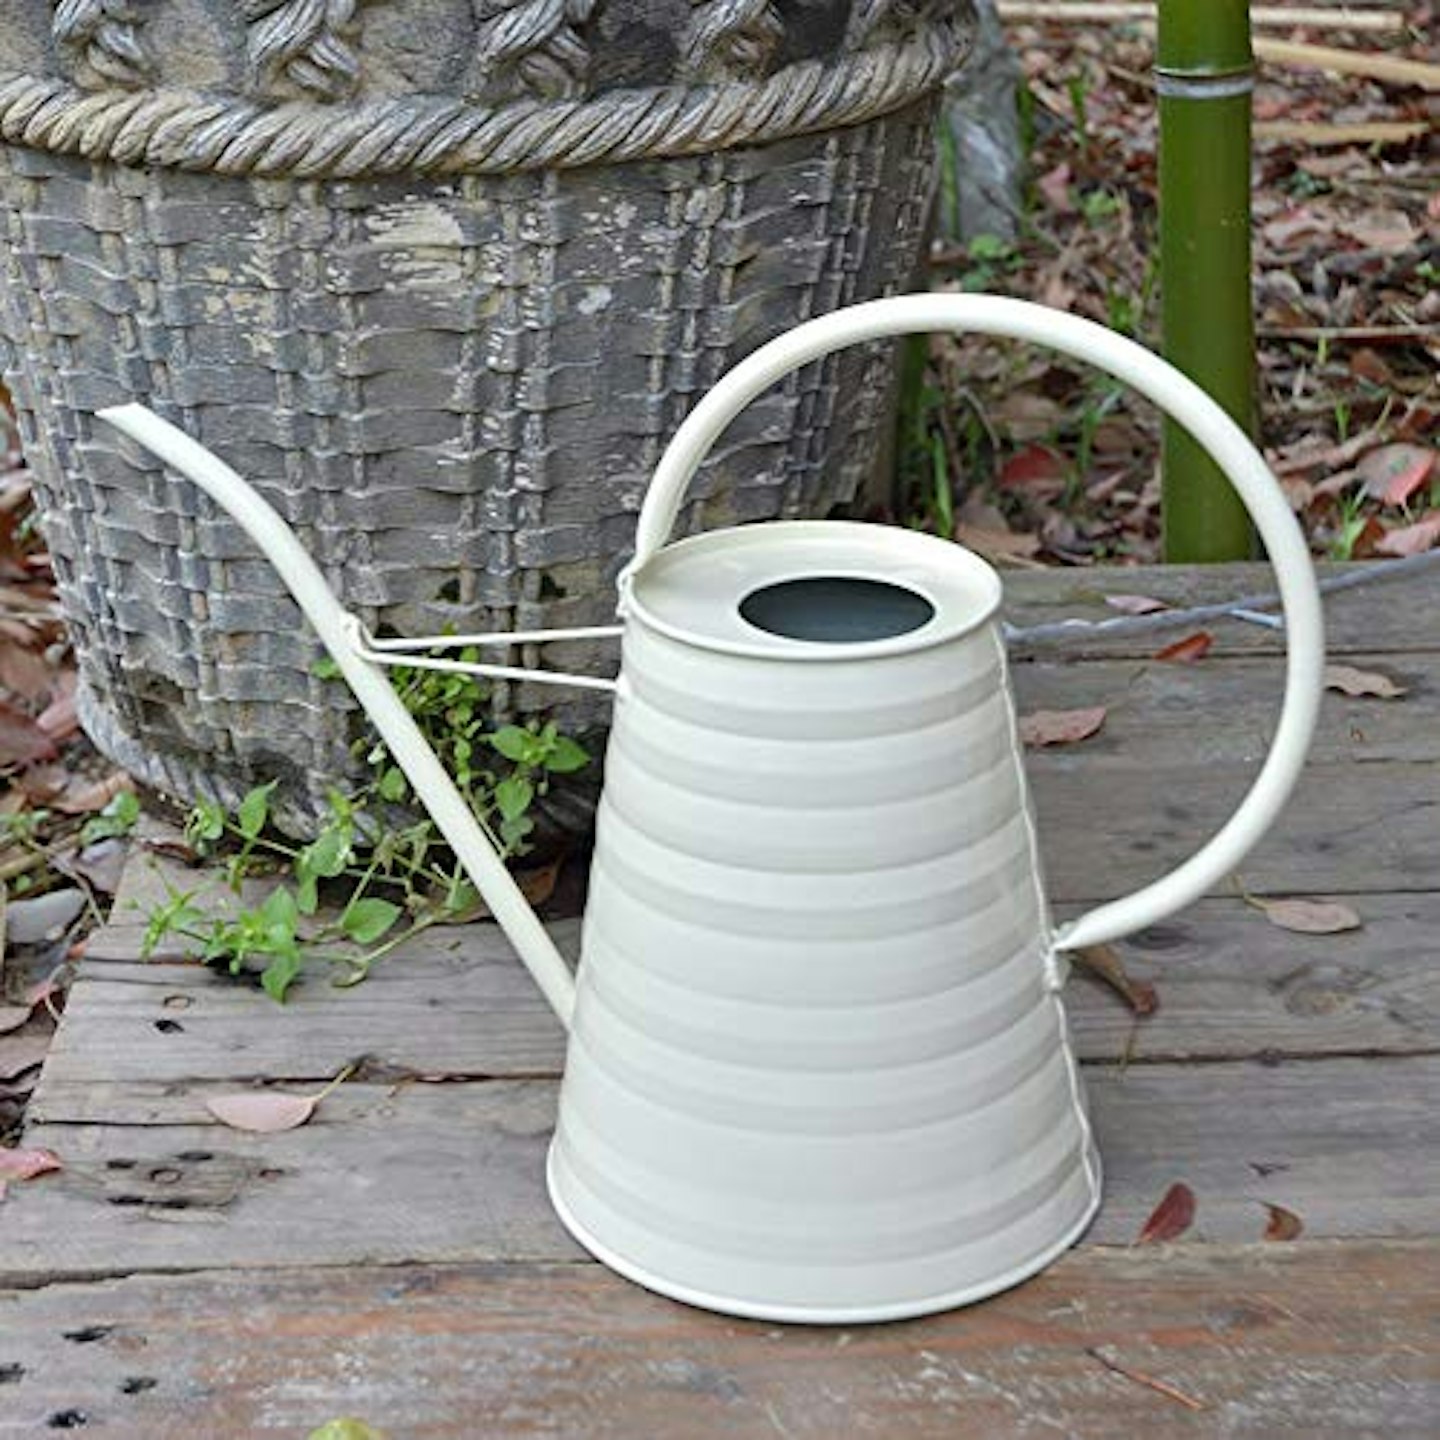 HORTICAN Galvanized Watering Can 